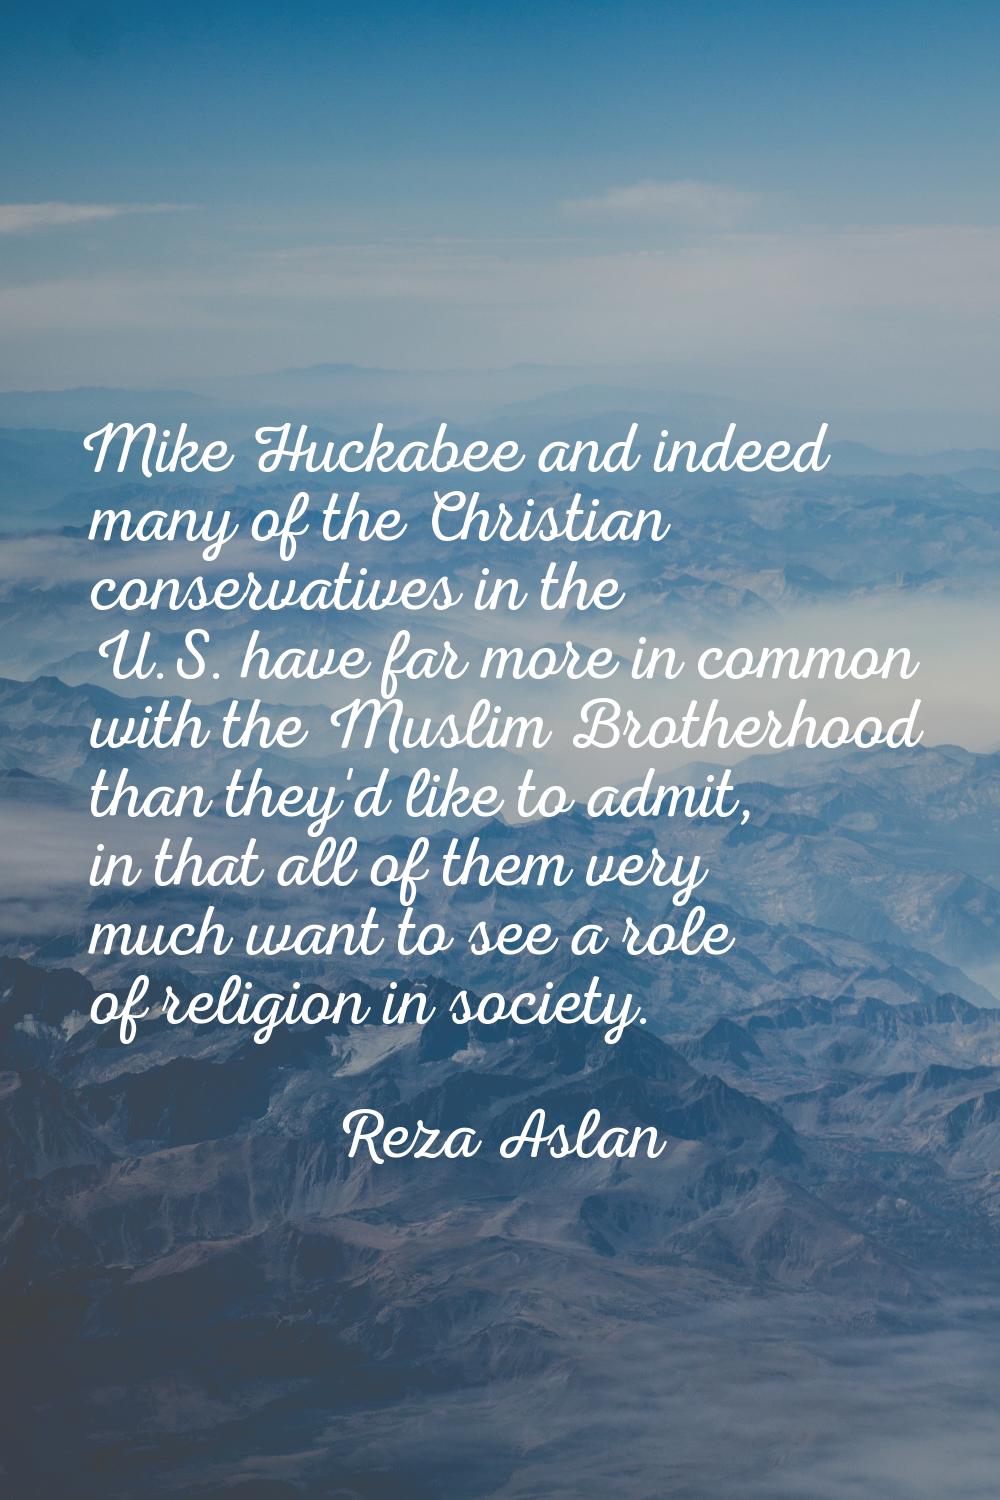 Mike Huckabee and indeed many of the Christian conservatives in the U.S. have far more in common wi